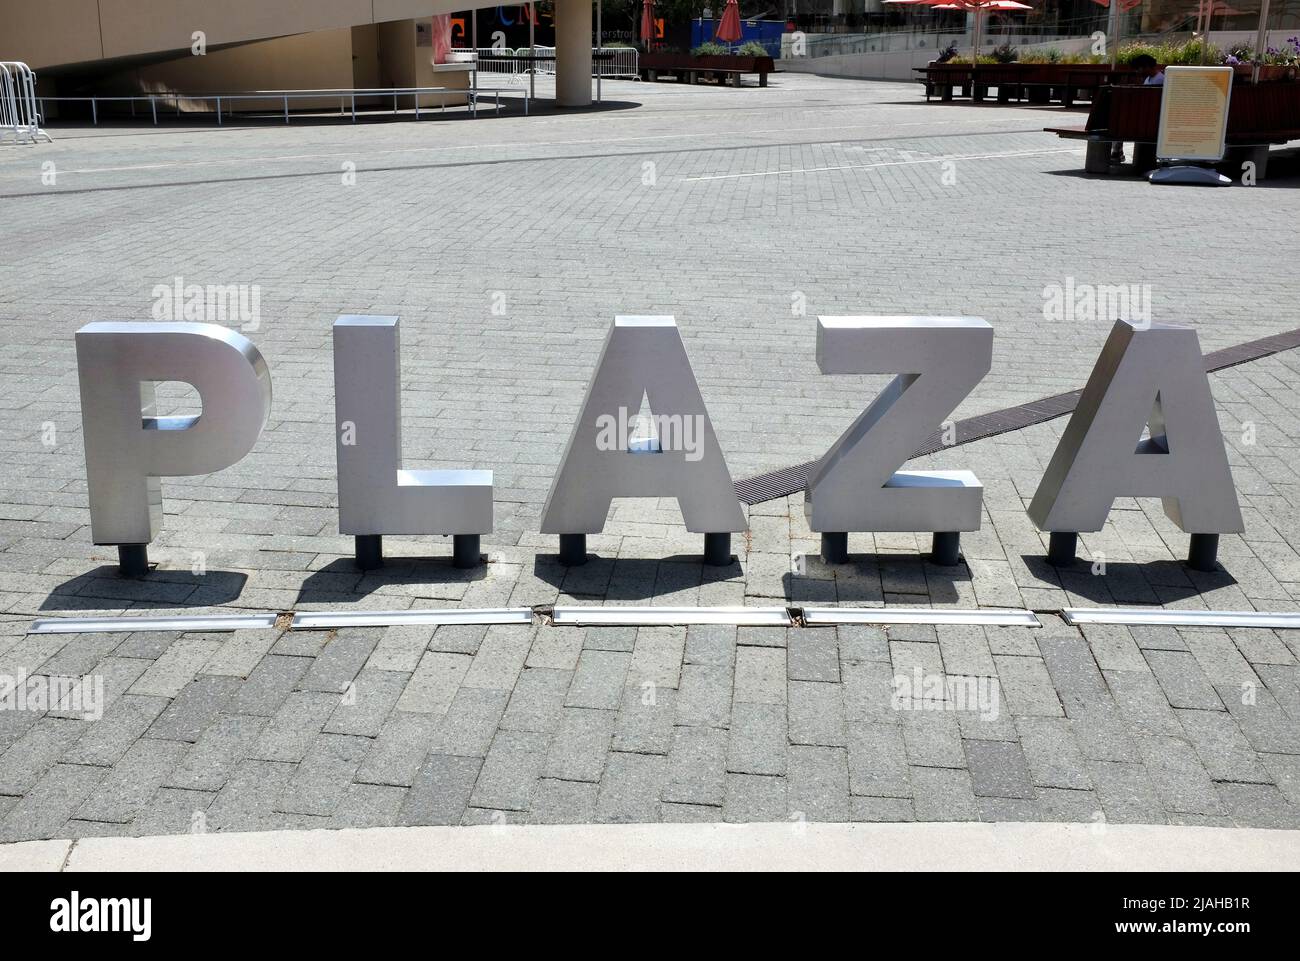 COSTA MESA, CALIFORNIA - 8 MAY 2021: Plaza sign at Argyros Plaza, a public gathering place that offers free events and performances, between Segerstro Stock Photo